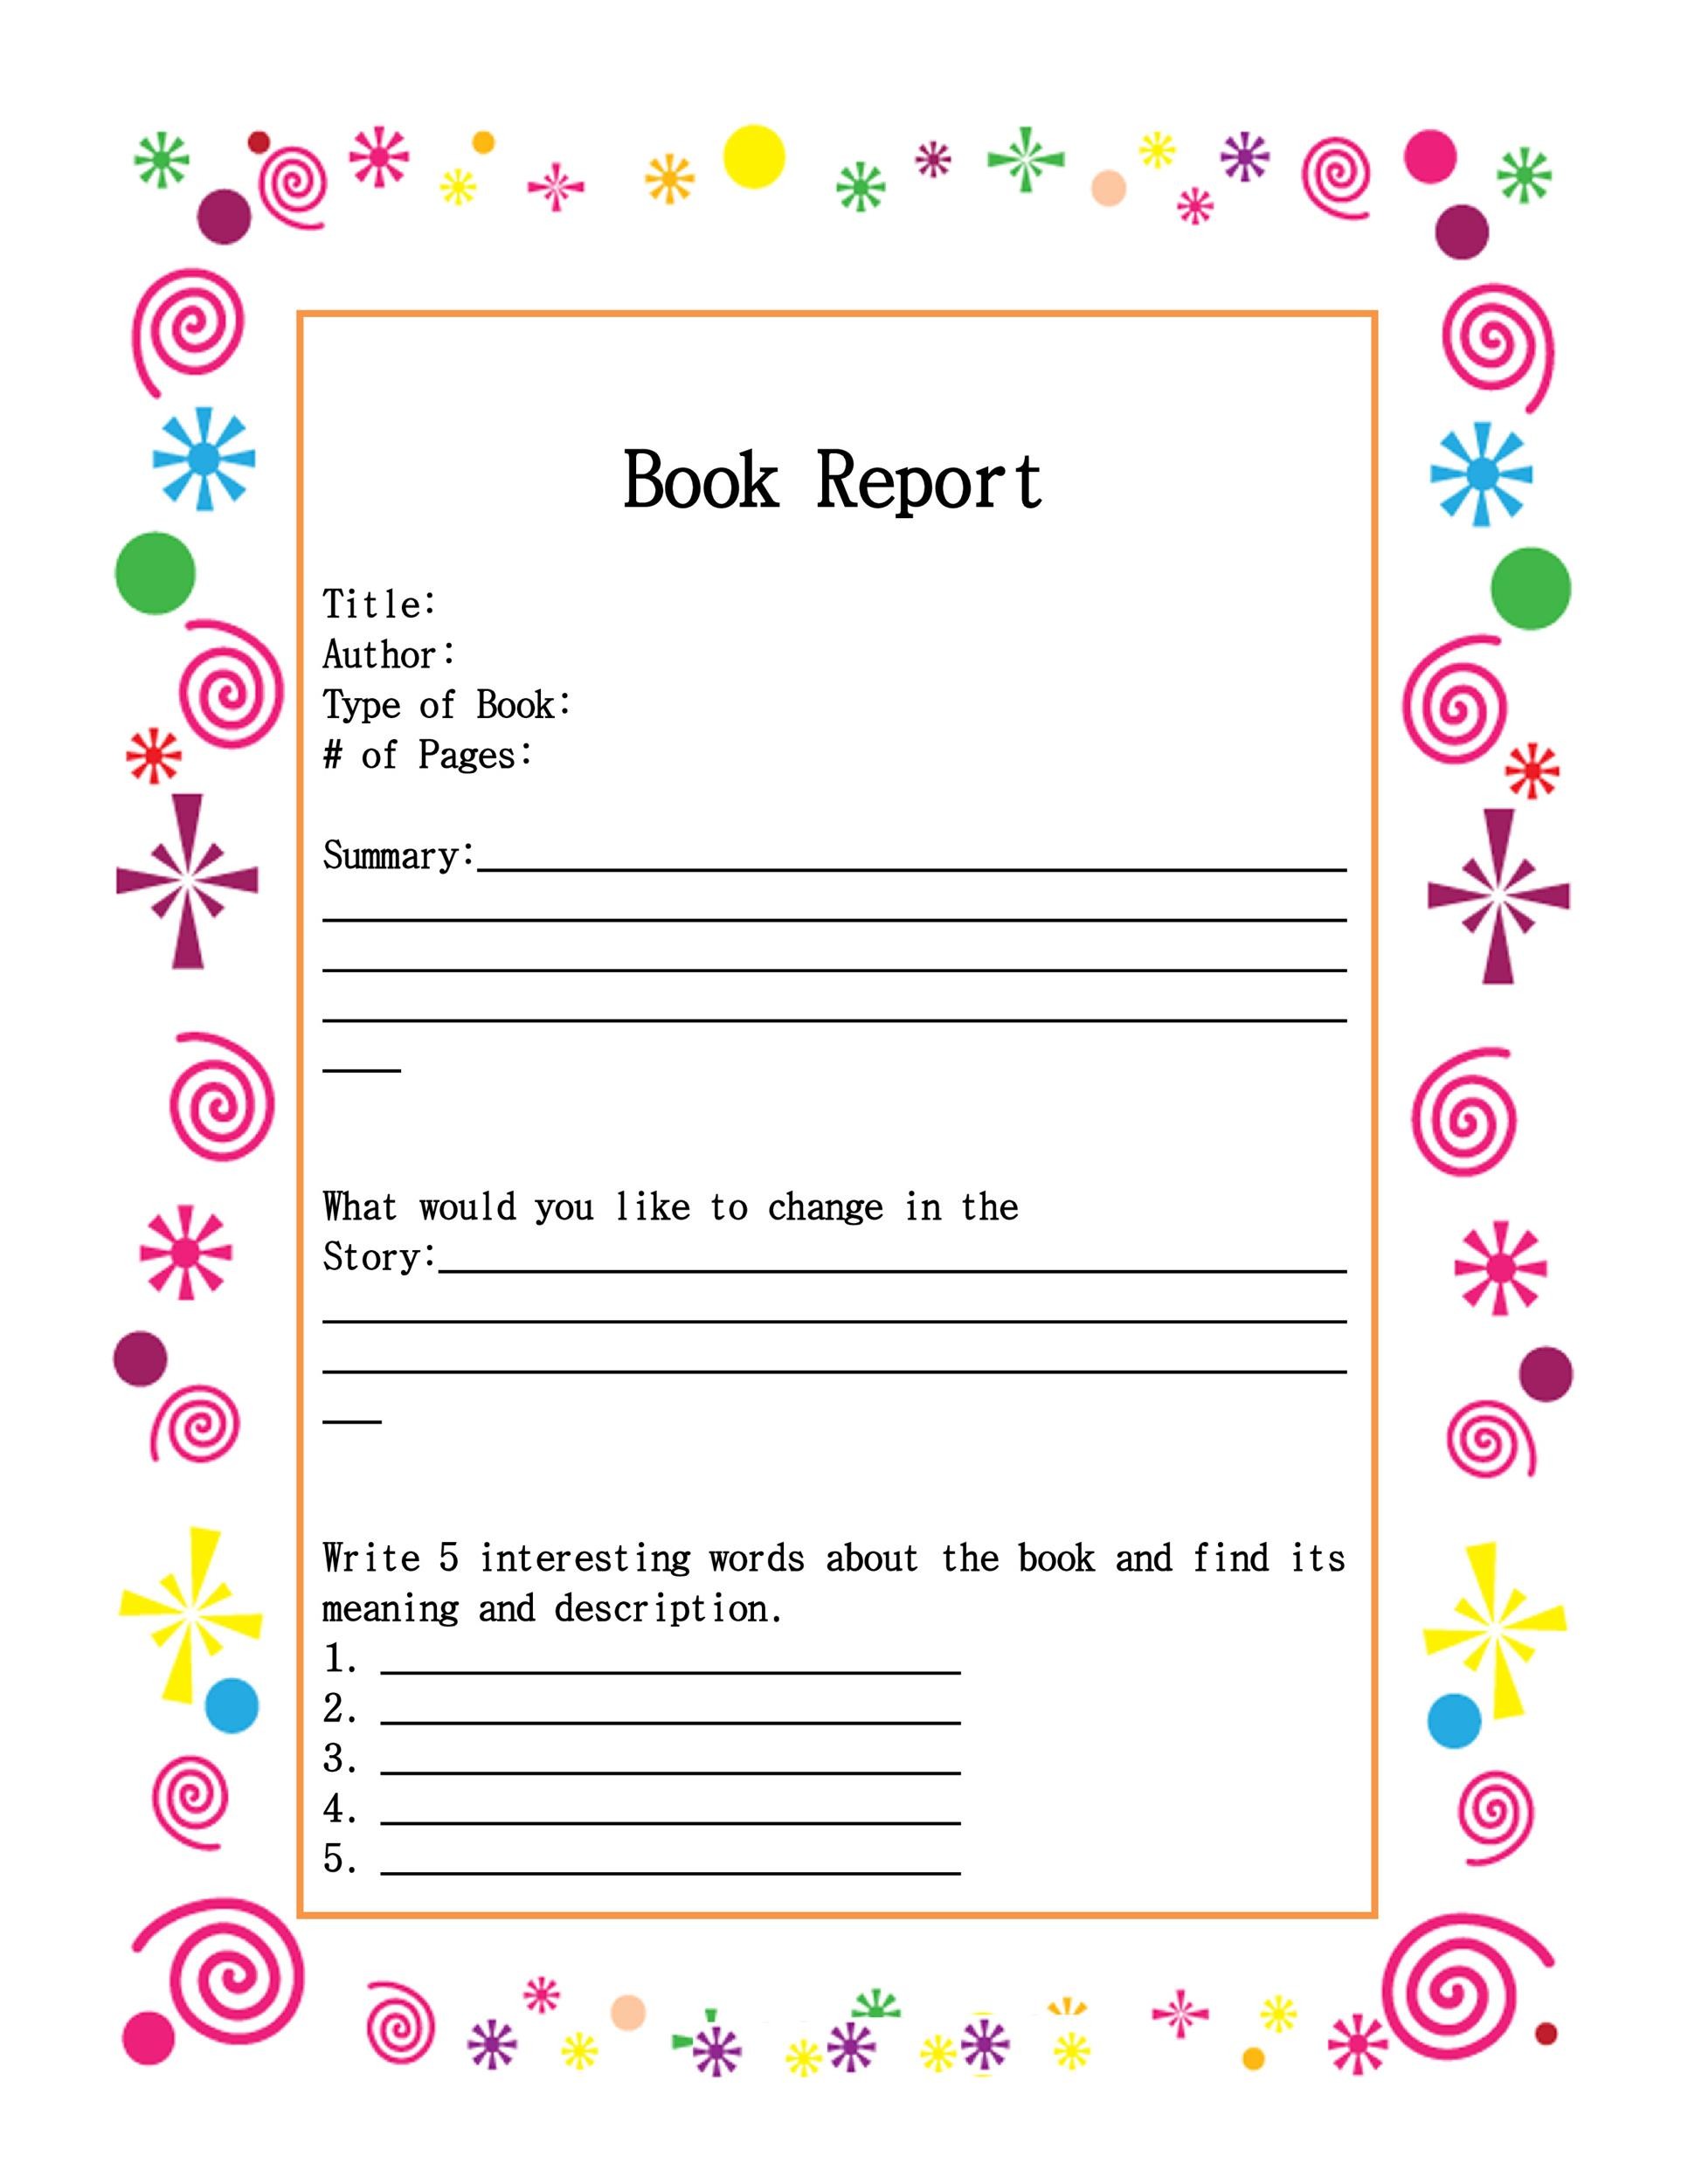 Book Report Forms - Book Report Form and Reading Log Printables In One Page Book Report Template